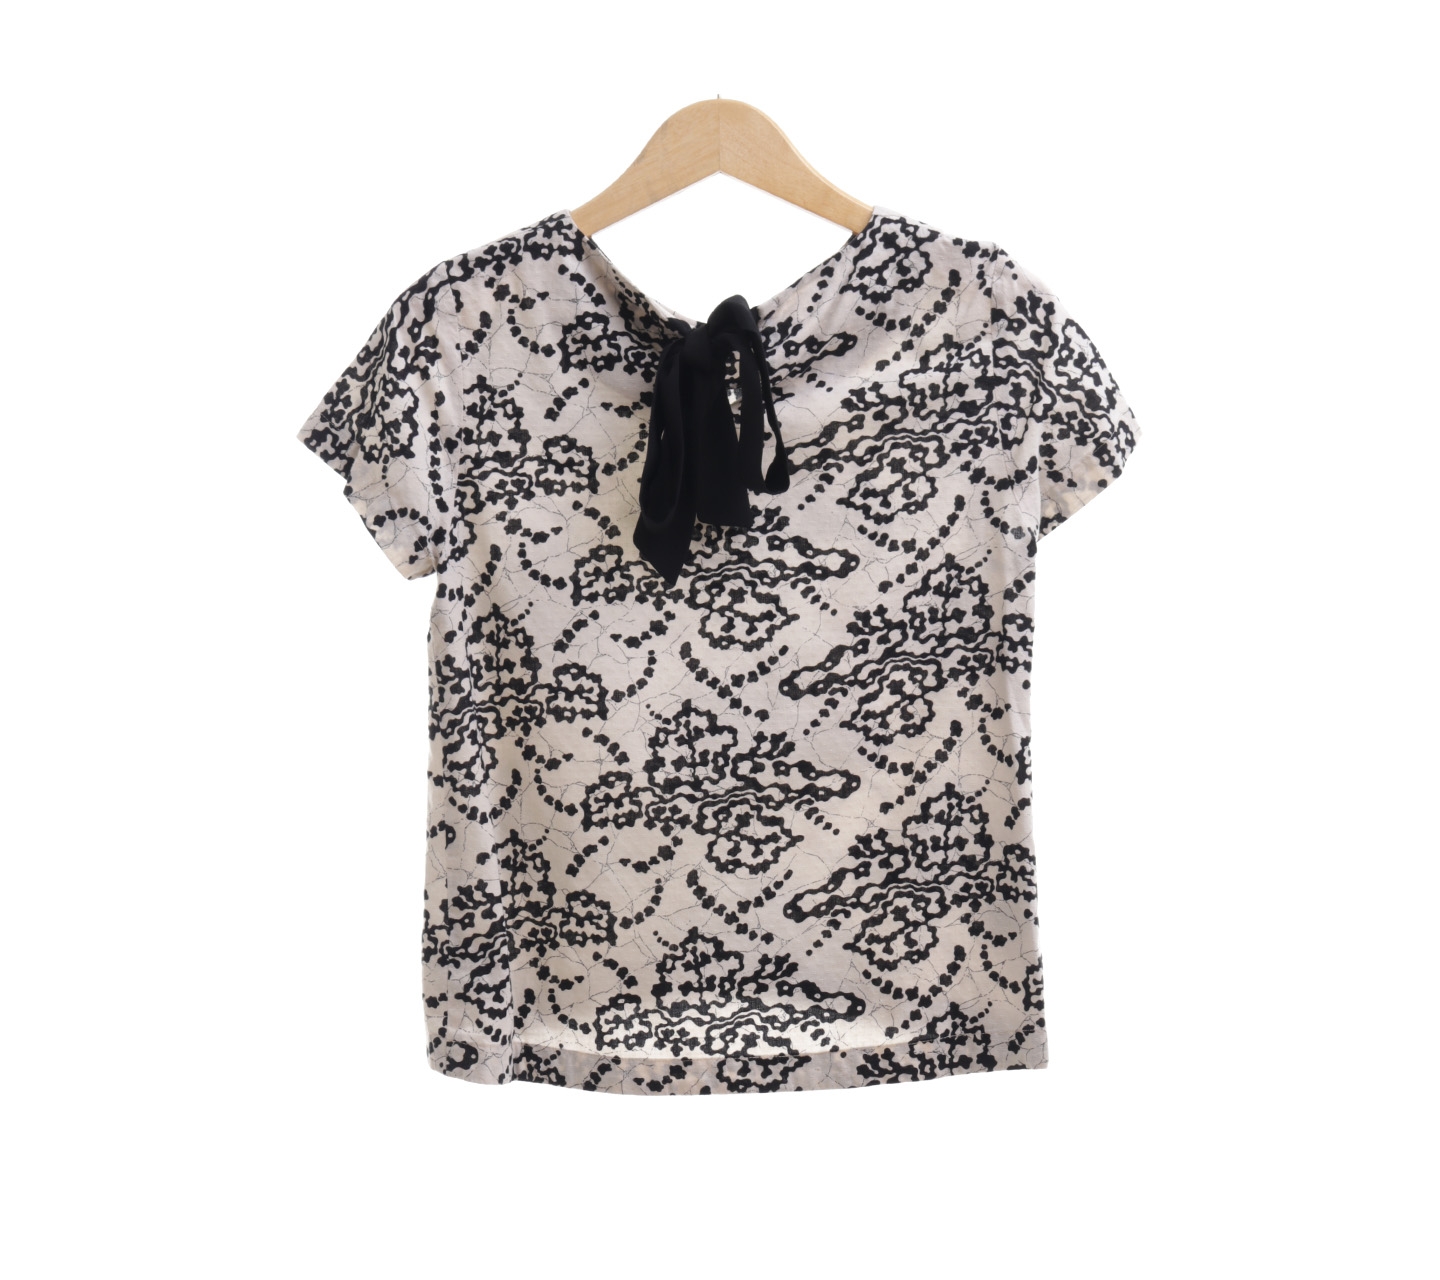 Anynome Off White & Black Patterned Blouse